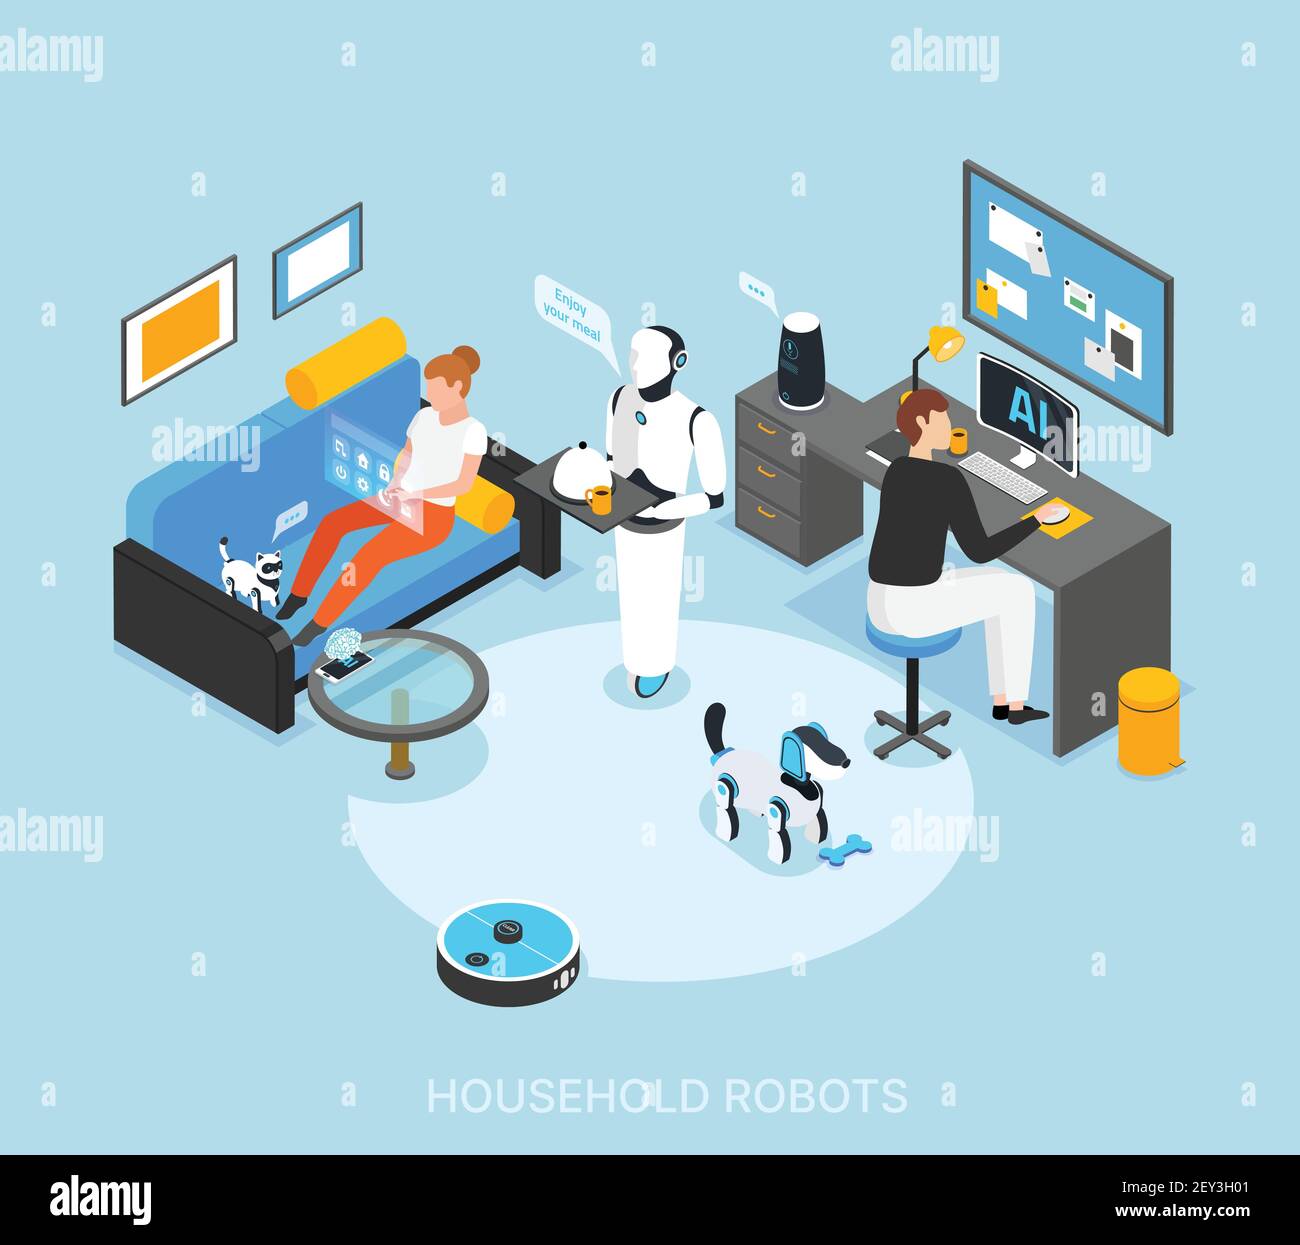 Robot integrated smart home with programmed humanoid cooking serving meals cleaning learning tasks isometric composition vector illustration Stock Vector